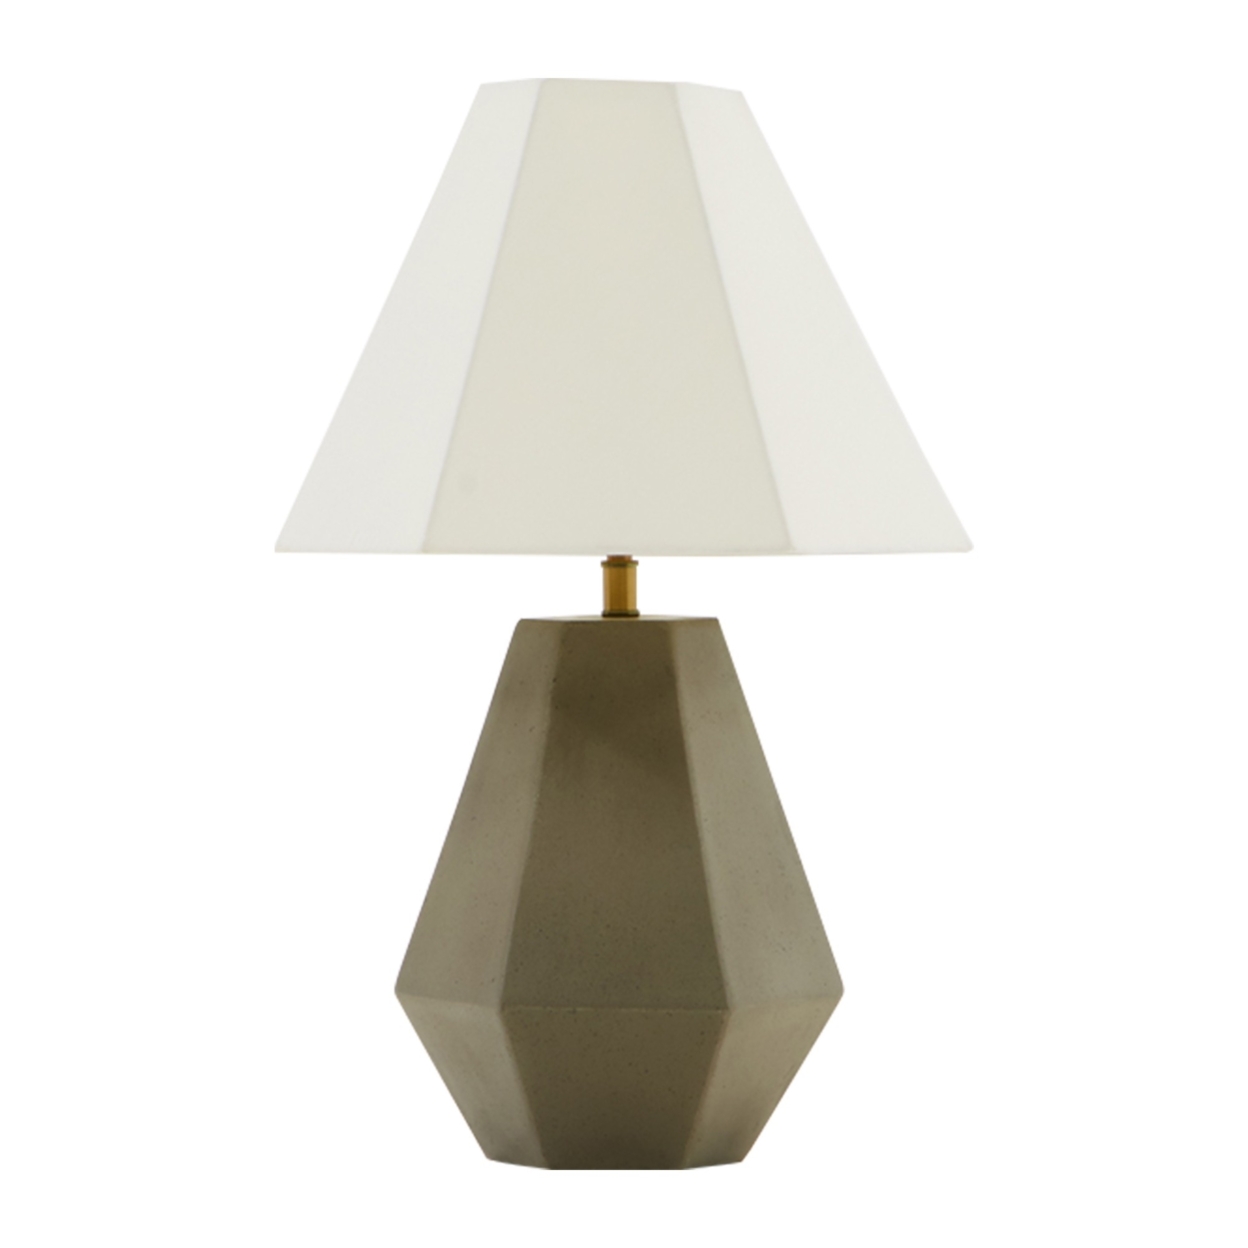 Concrete Base Modern Table Lamp With Empire Shade, White And Gray- Saltoro Sherpi